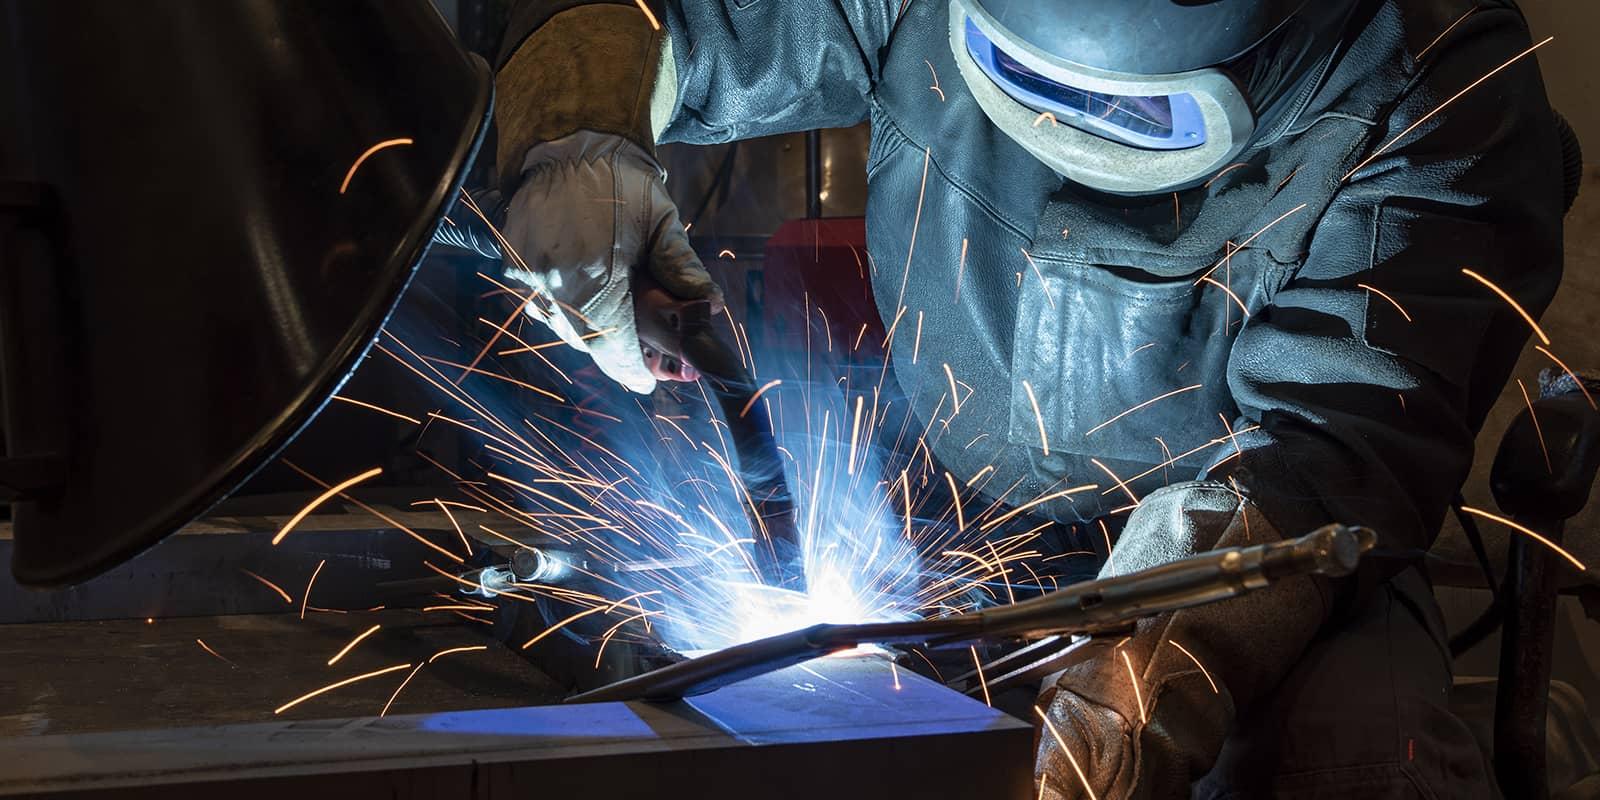 Learn about Canadian Fabricating & Welding